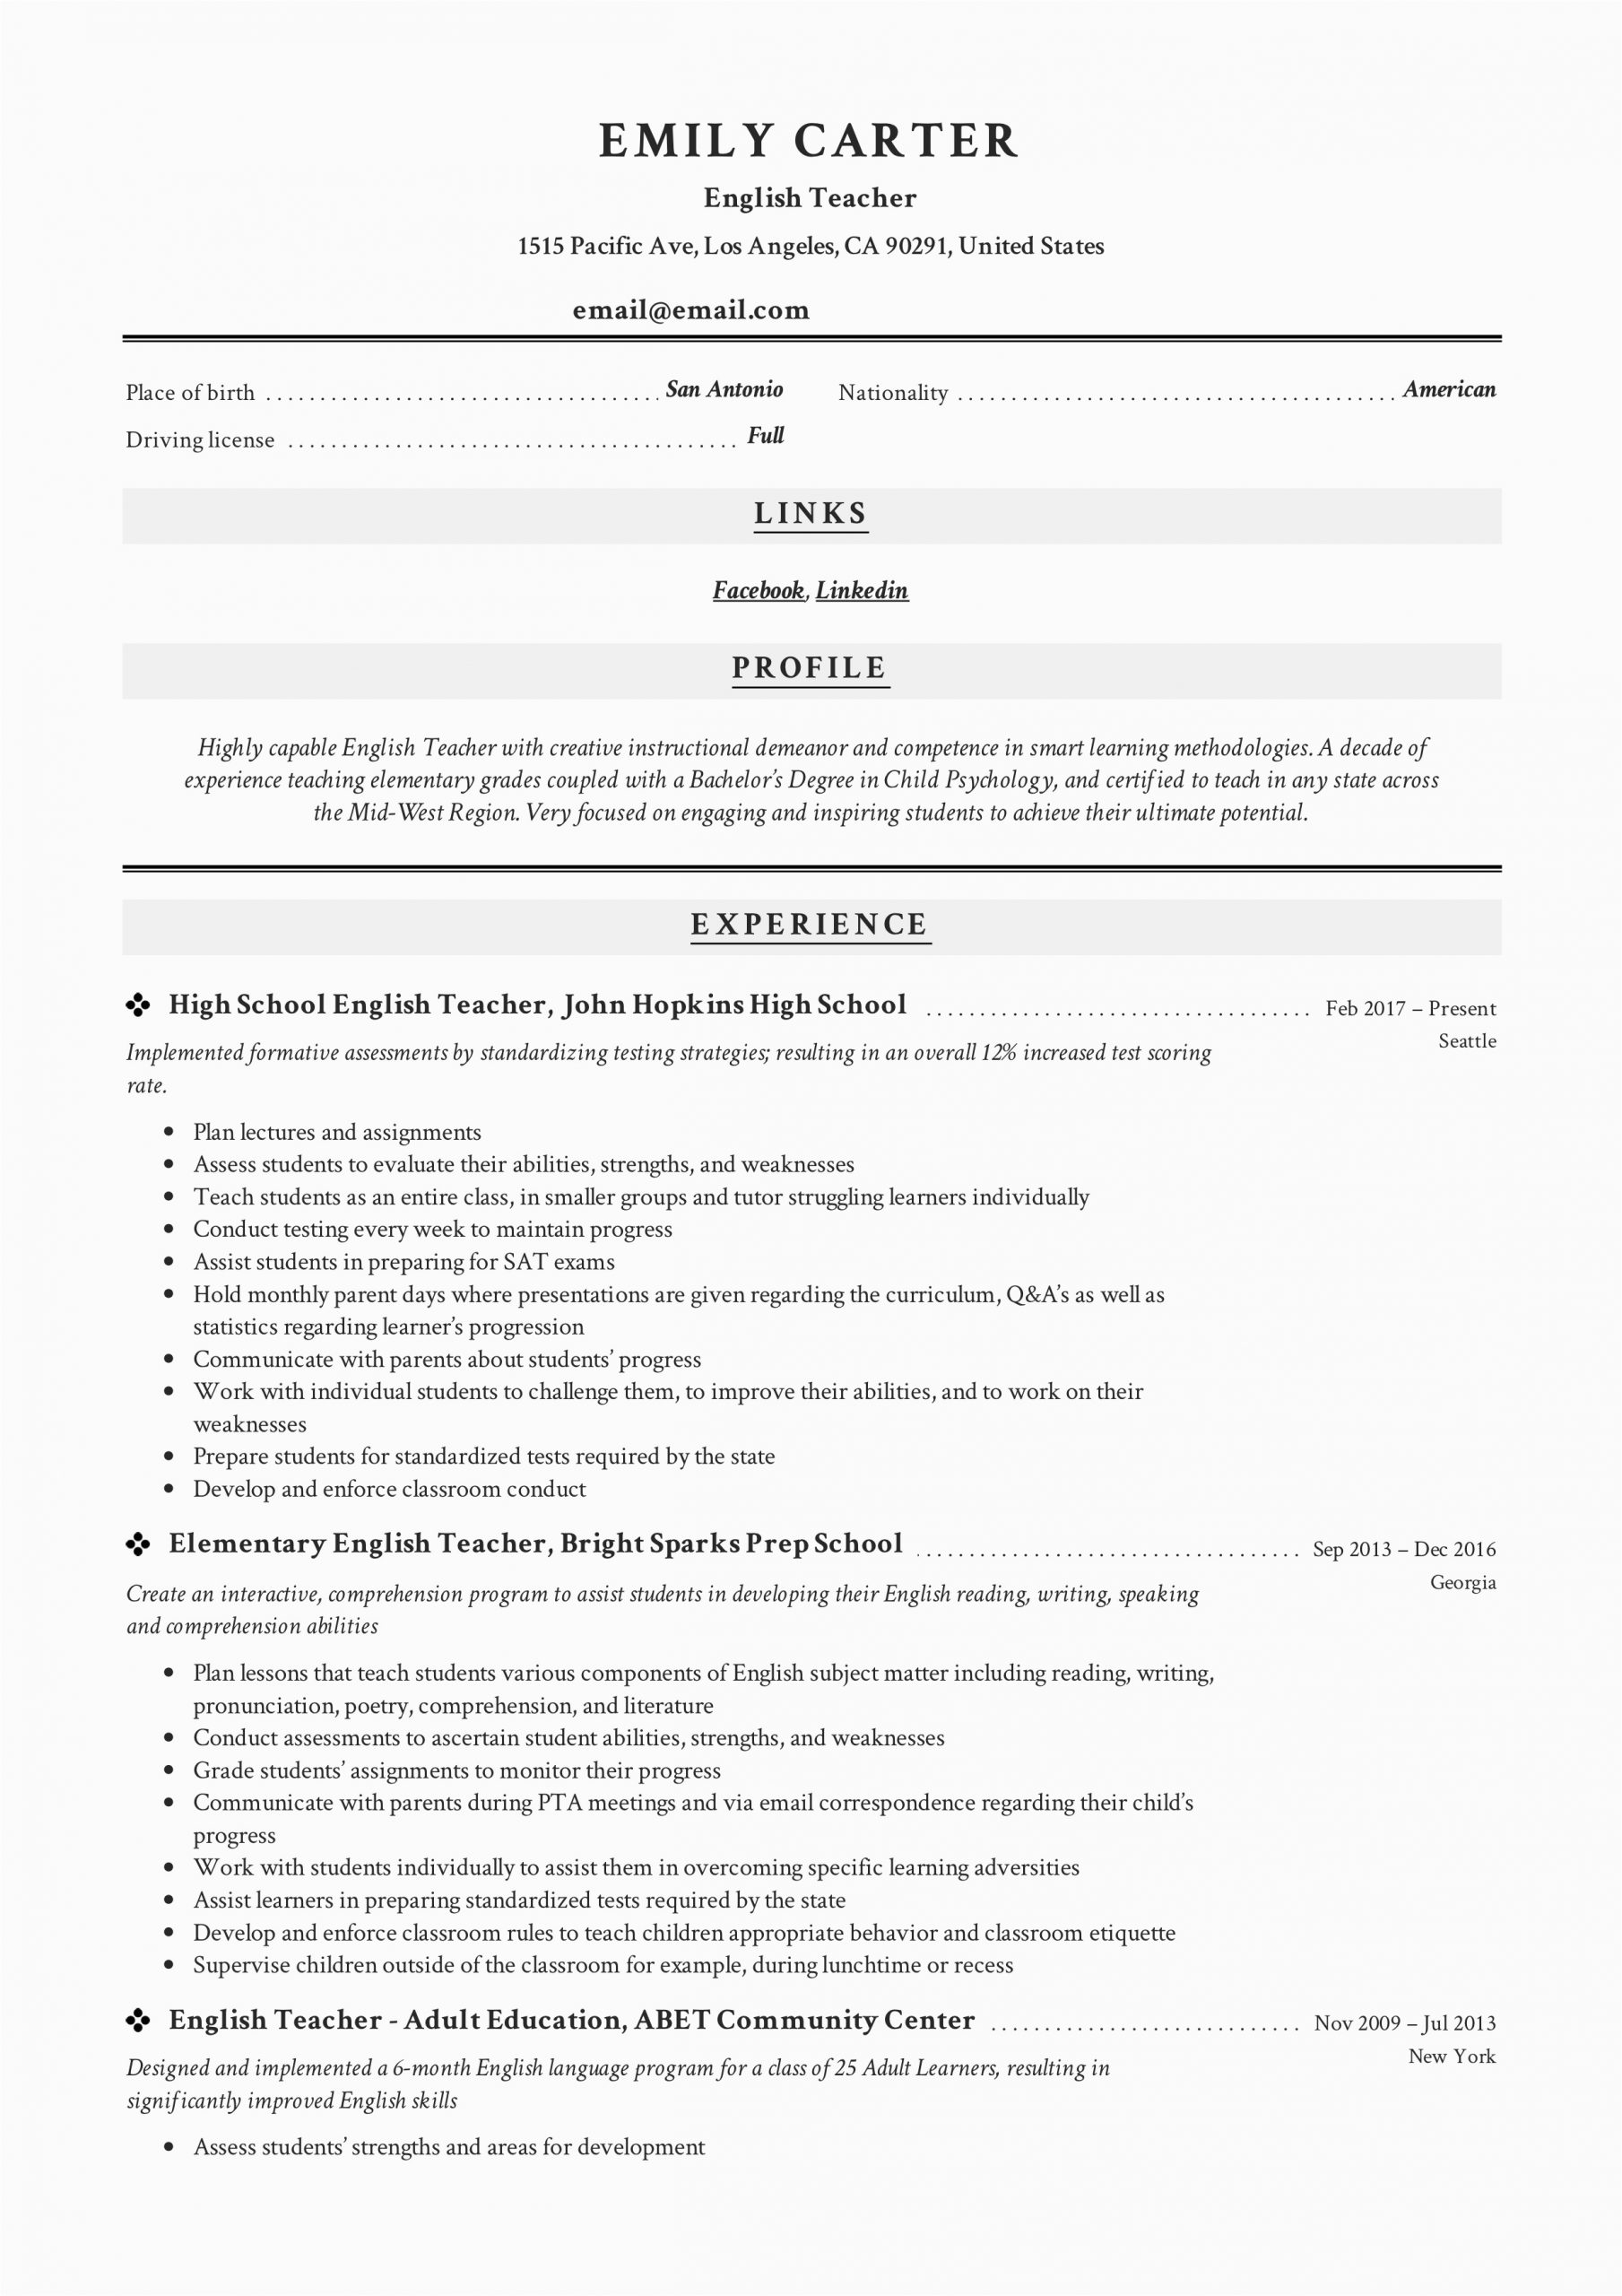 Free Professional Resume Examples and Samples Resume Templates [2019] Pdf and Word